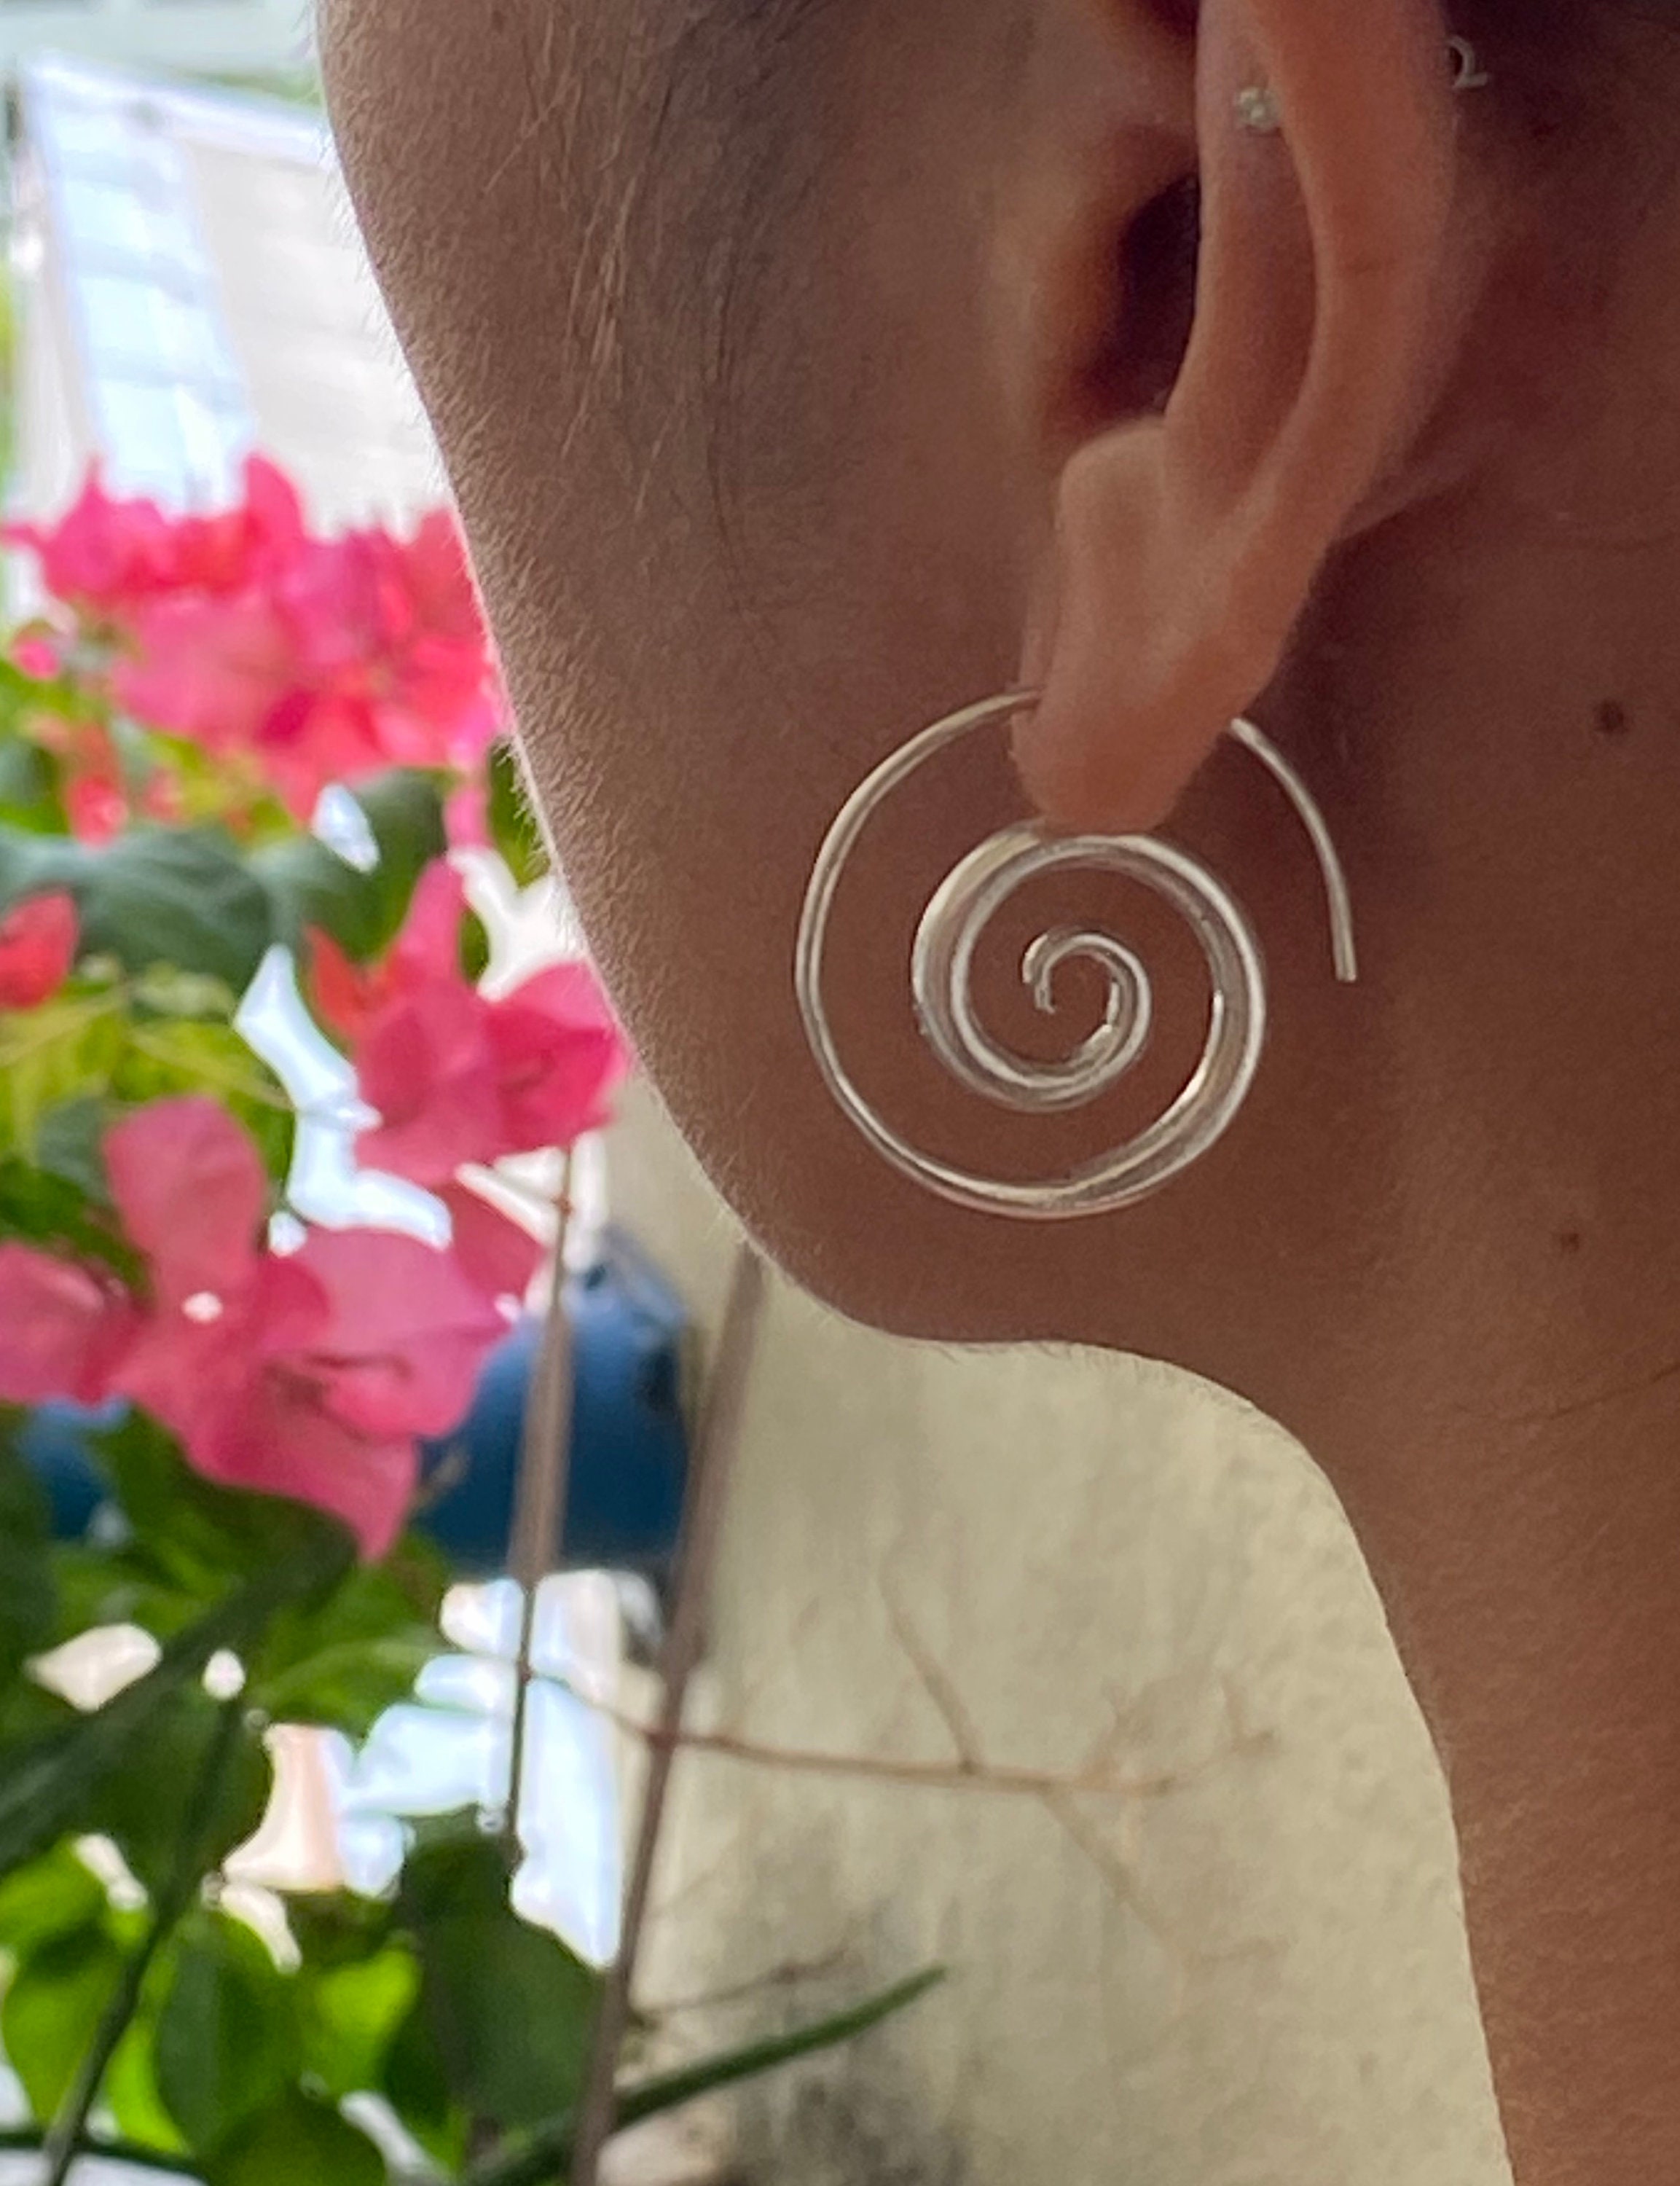 STERLING SILVER SPIRAL EARRINGS – Of Earth And Ocean